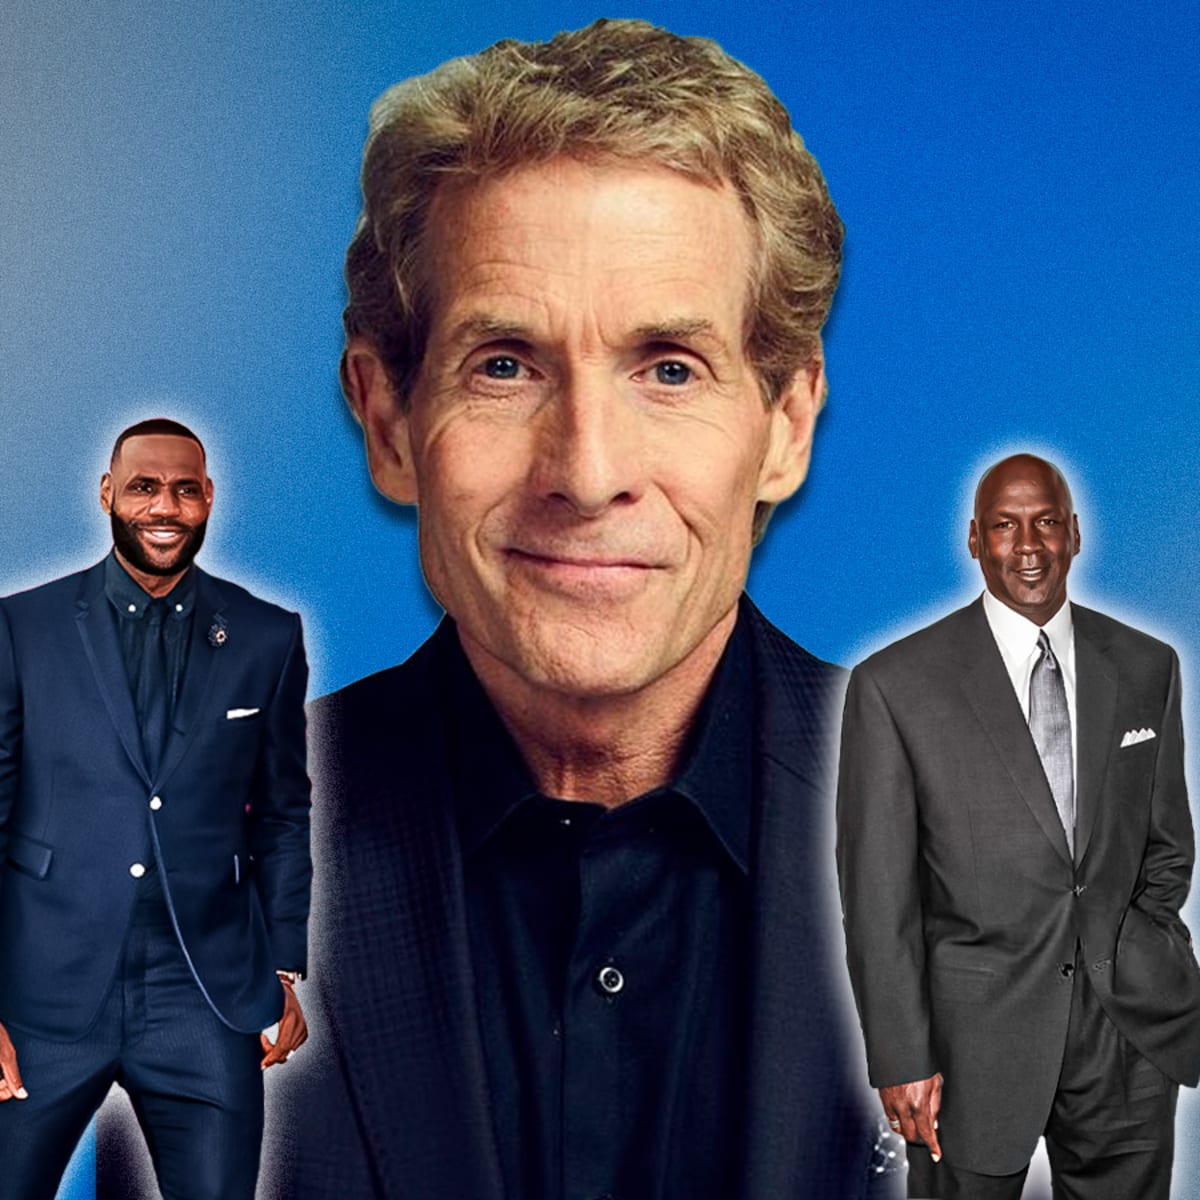 Skip Bayless says Michael Jordan would figure way to beat LeBron James  one-on-one just on sheer killer will: “I don't think LeBron has it,  Michael just spits it”